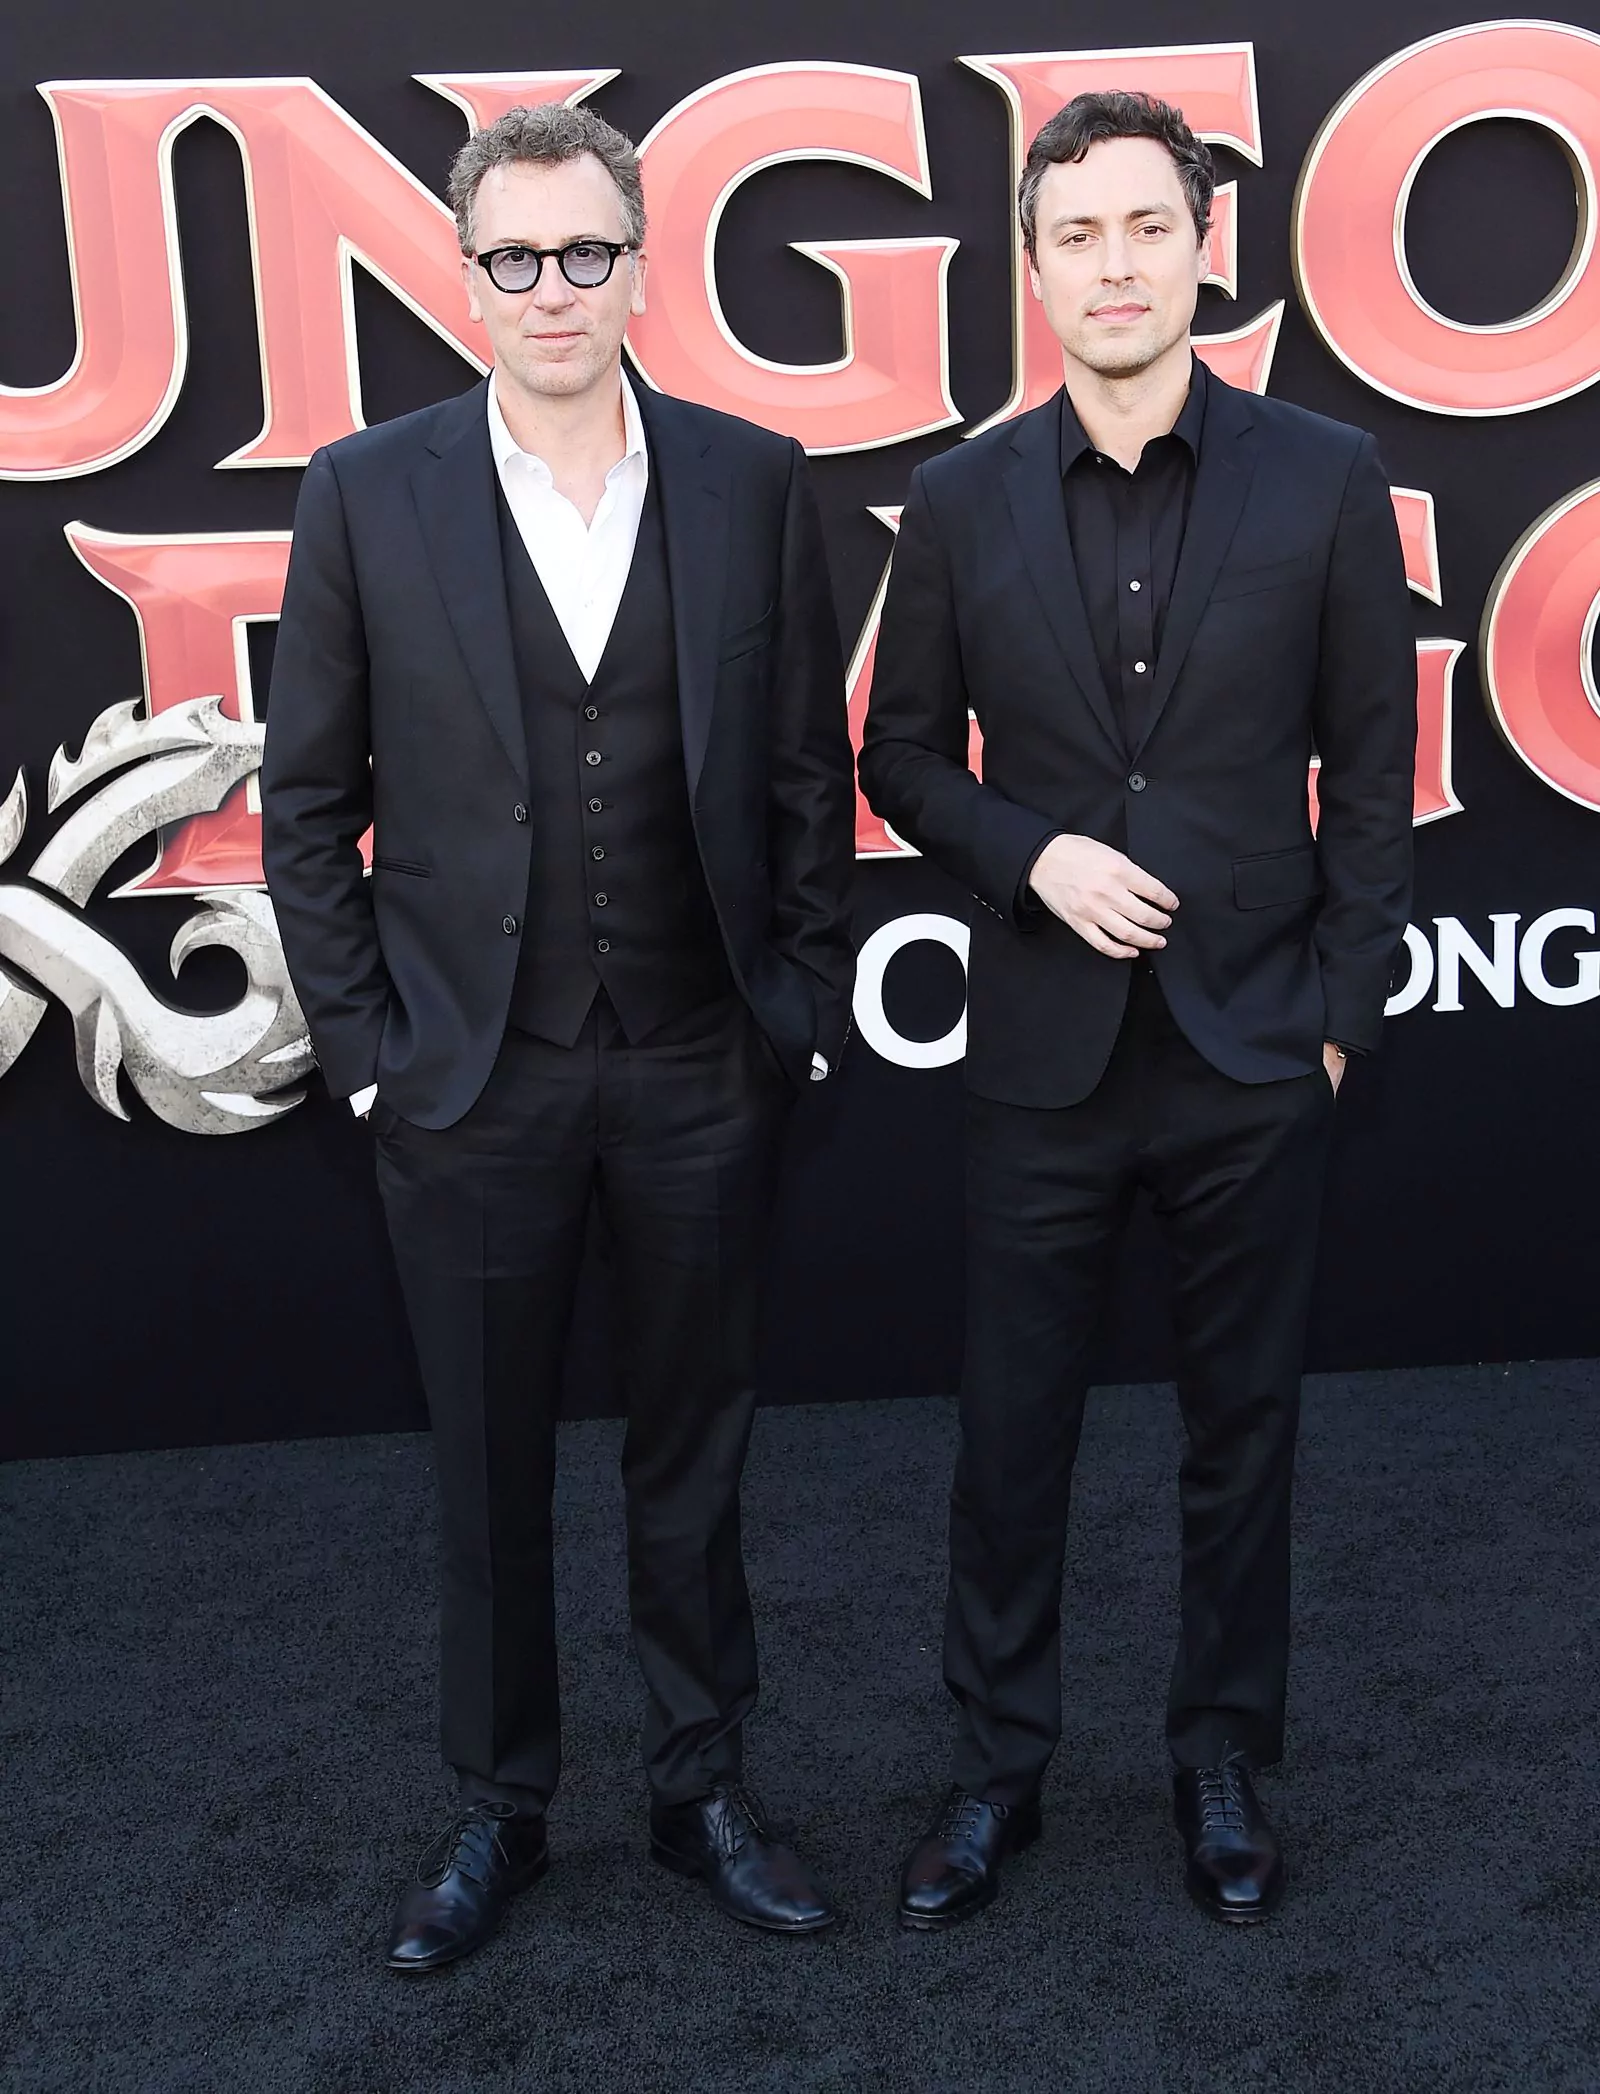 Jonathan Goldstein and John Francis Daley attend the premiere of Dungeons & Dragons: Honor Among Thieves in Los Angeles on March 26, 2023.